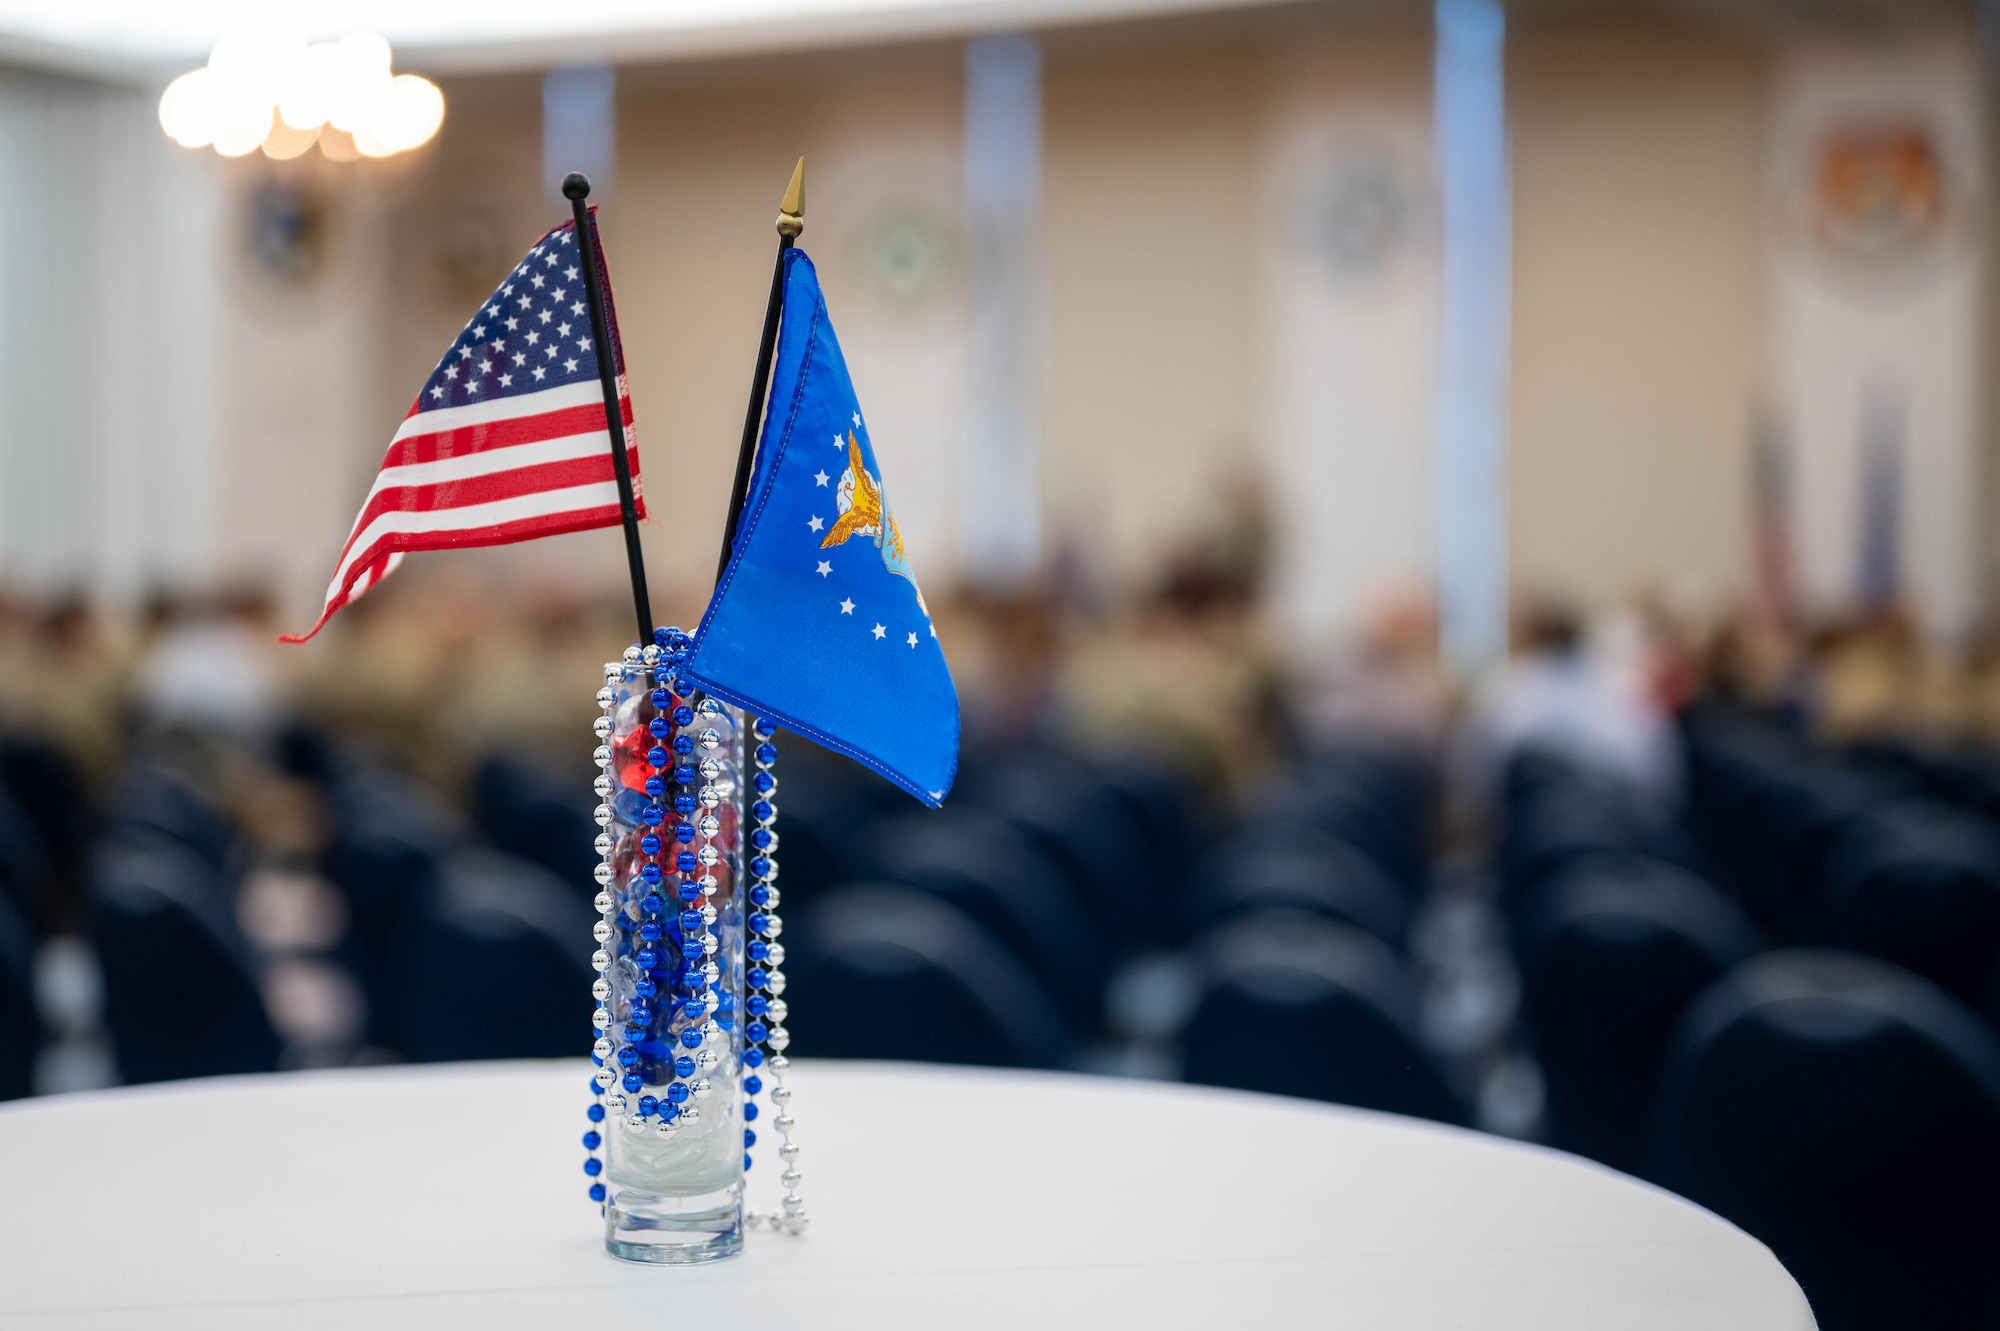 Decoration on a table during a change of command ceremony.